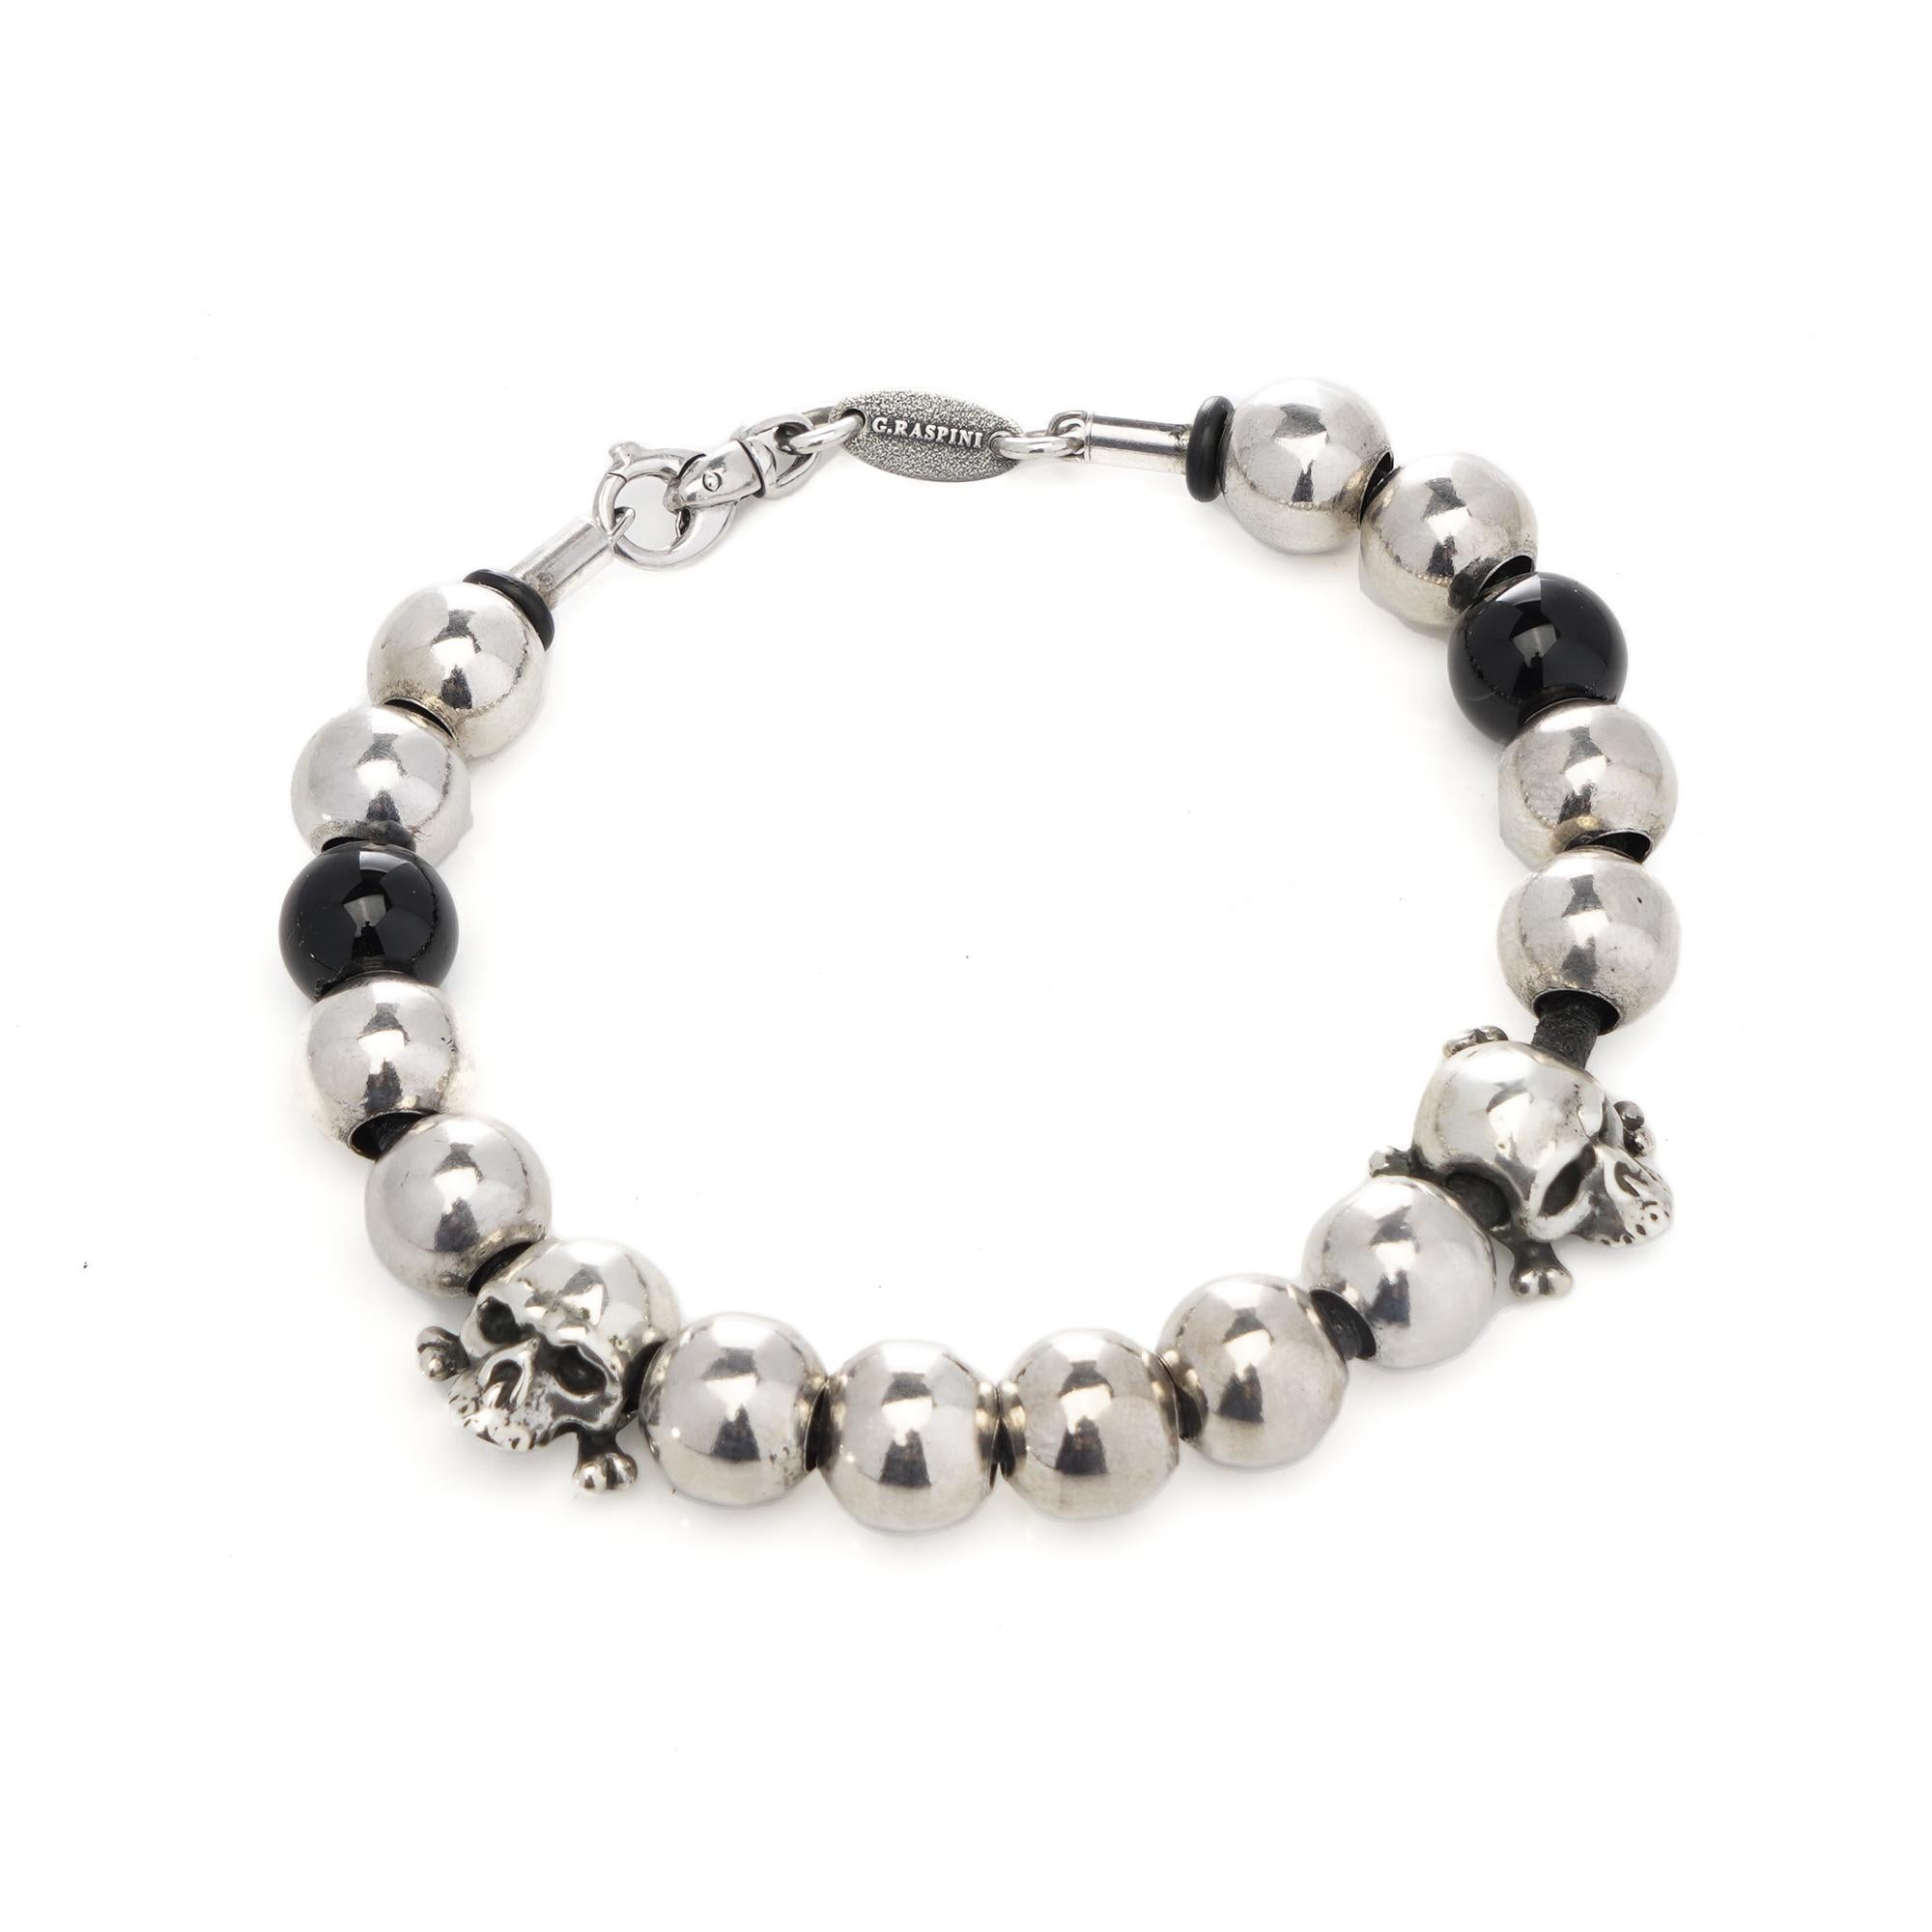 Giovani Raspini sterling 925 silver bead bracelet with skull accents For Sale 4